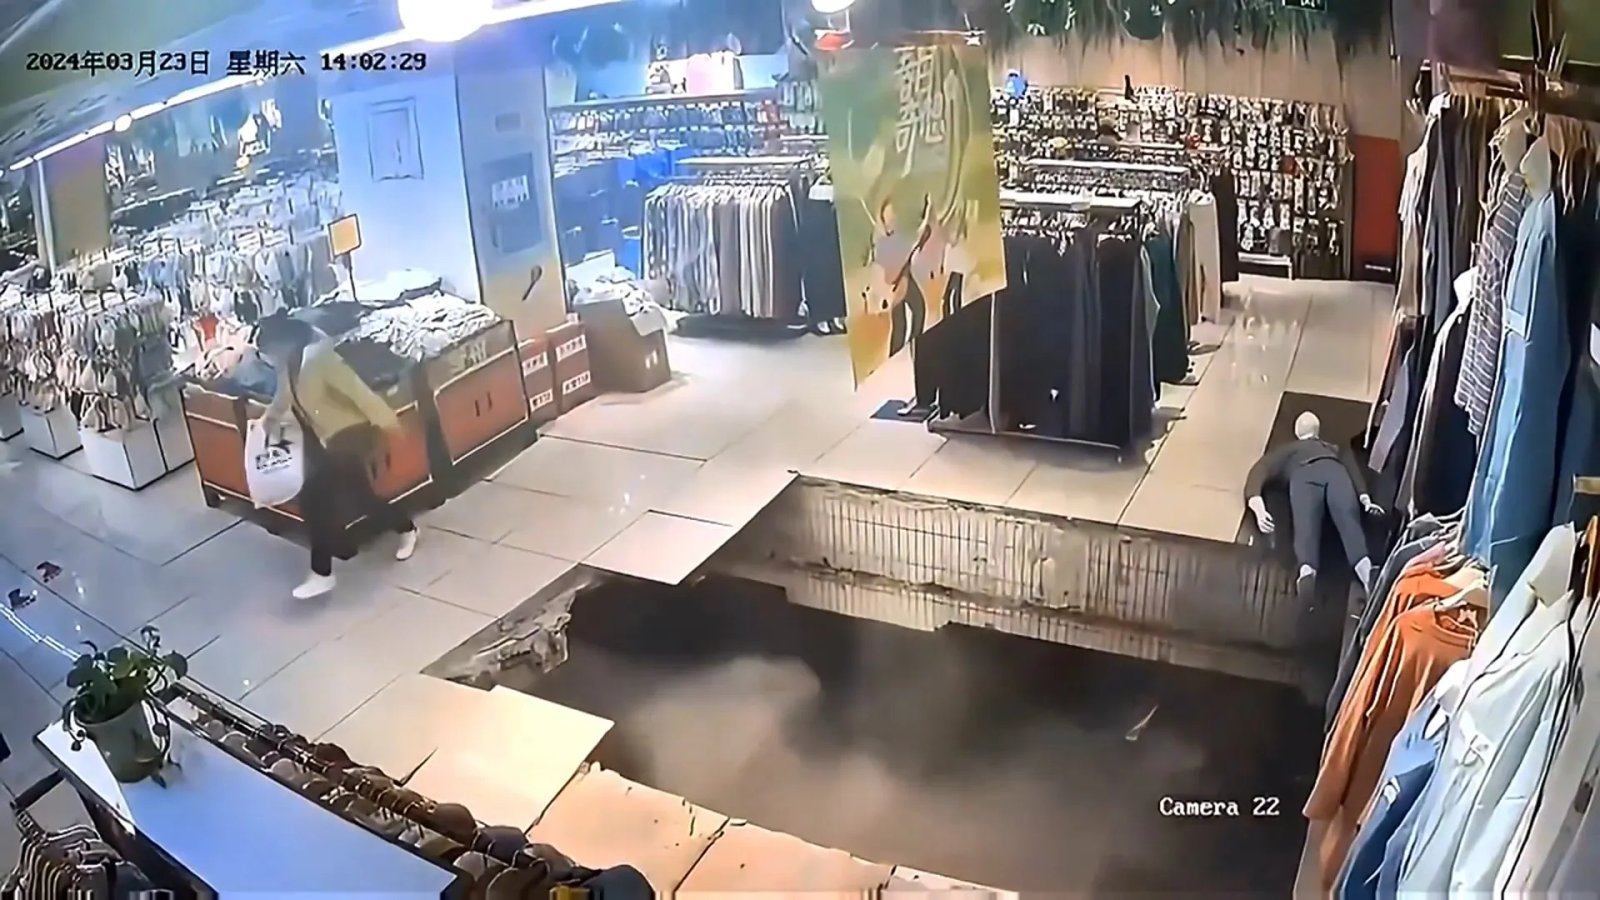 WATCH Woman falls through floor as possible sinkhole opens up under shopping mall